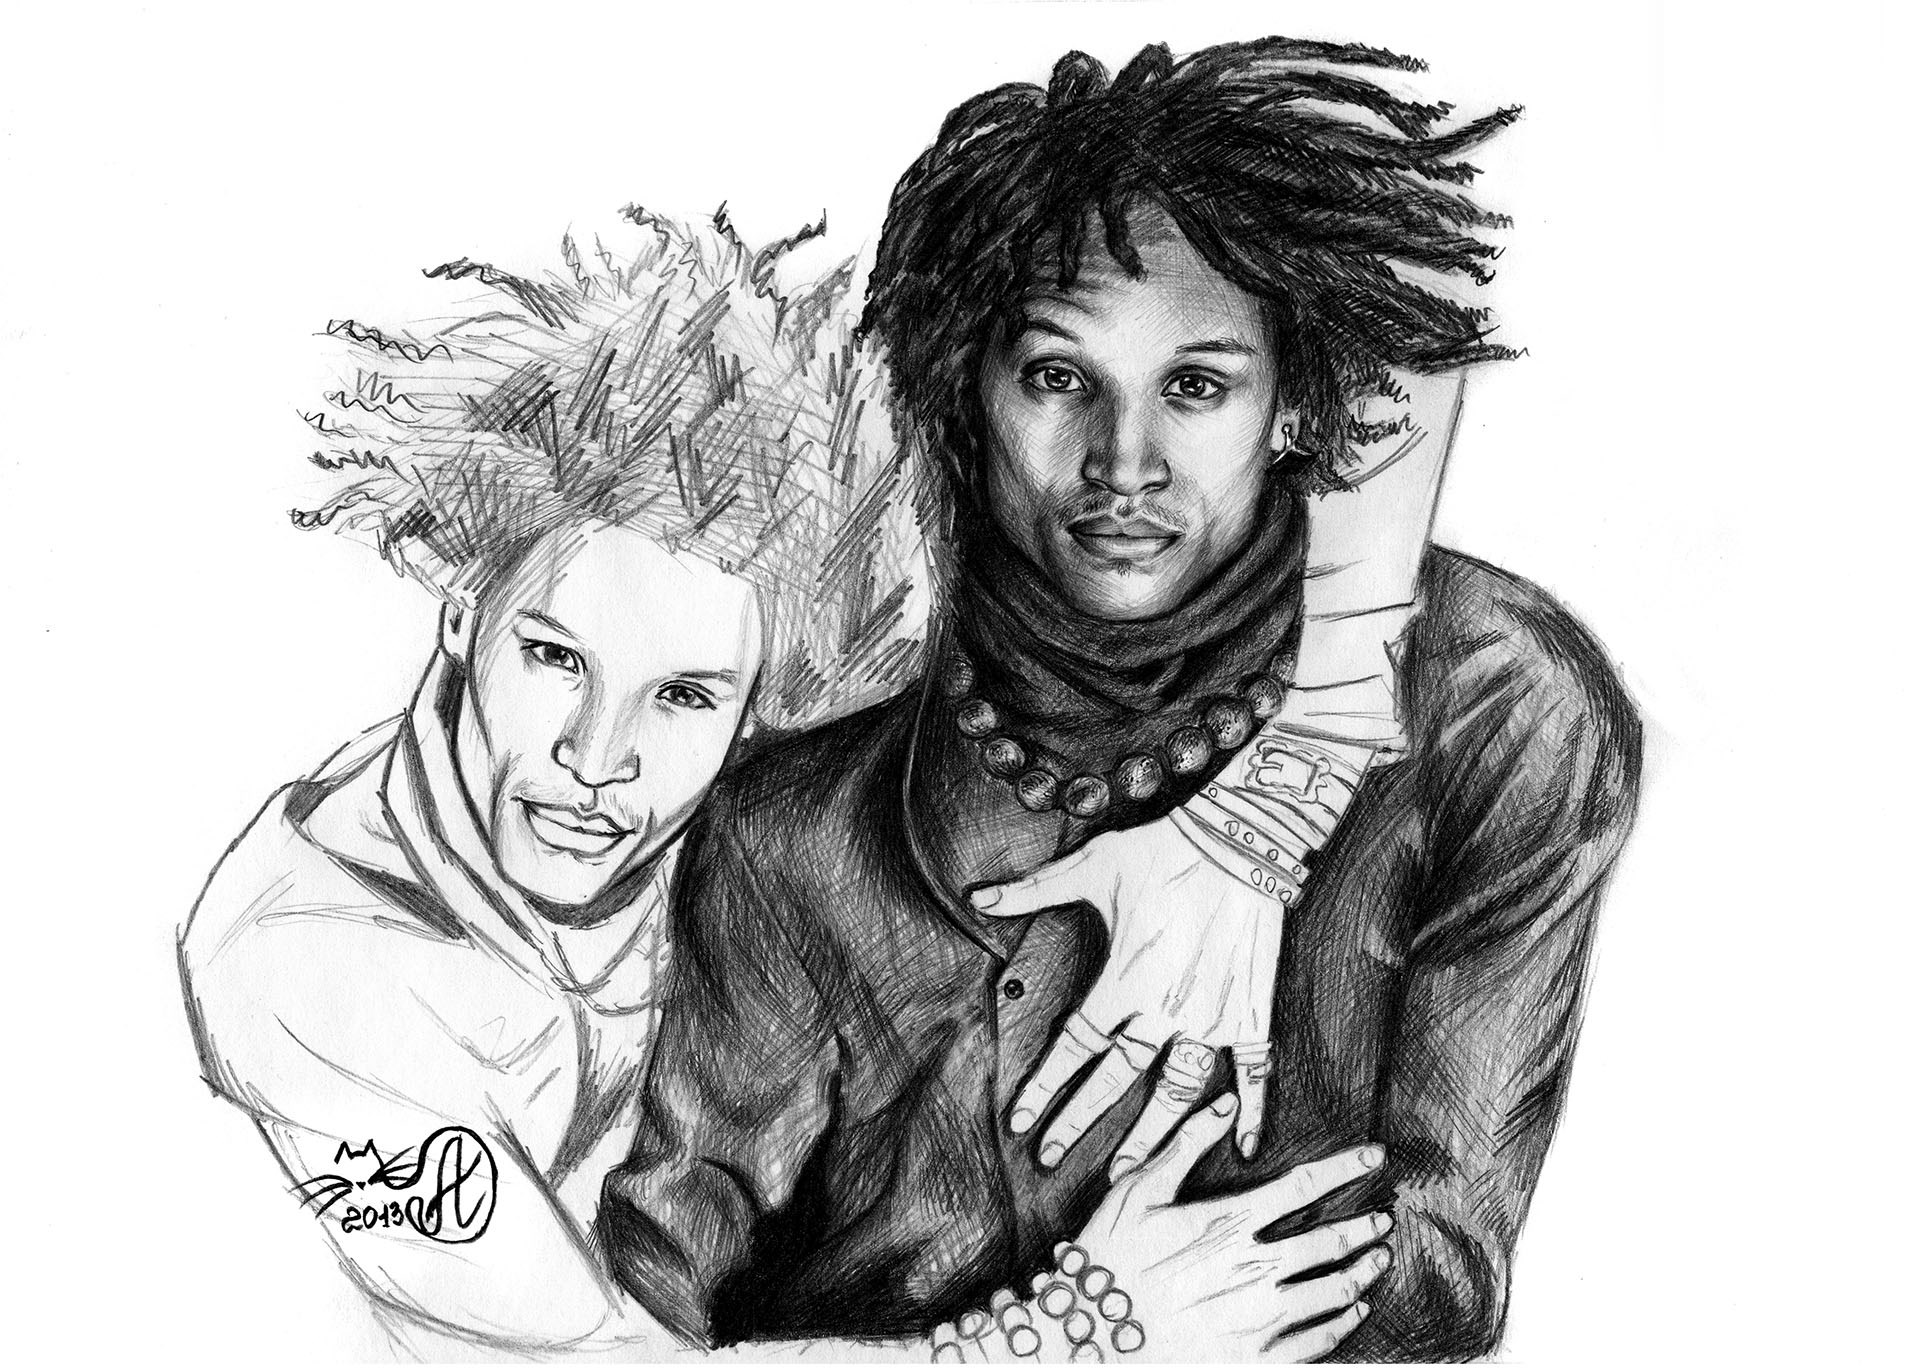 Les Twins Wallpapers